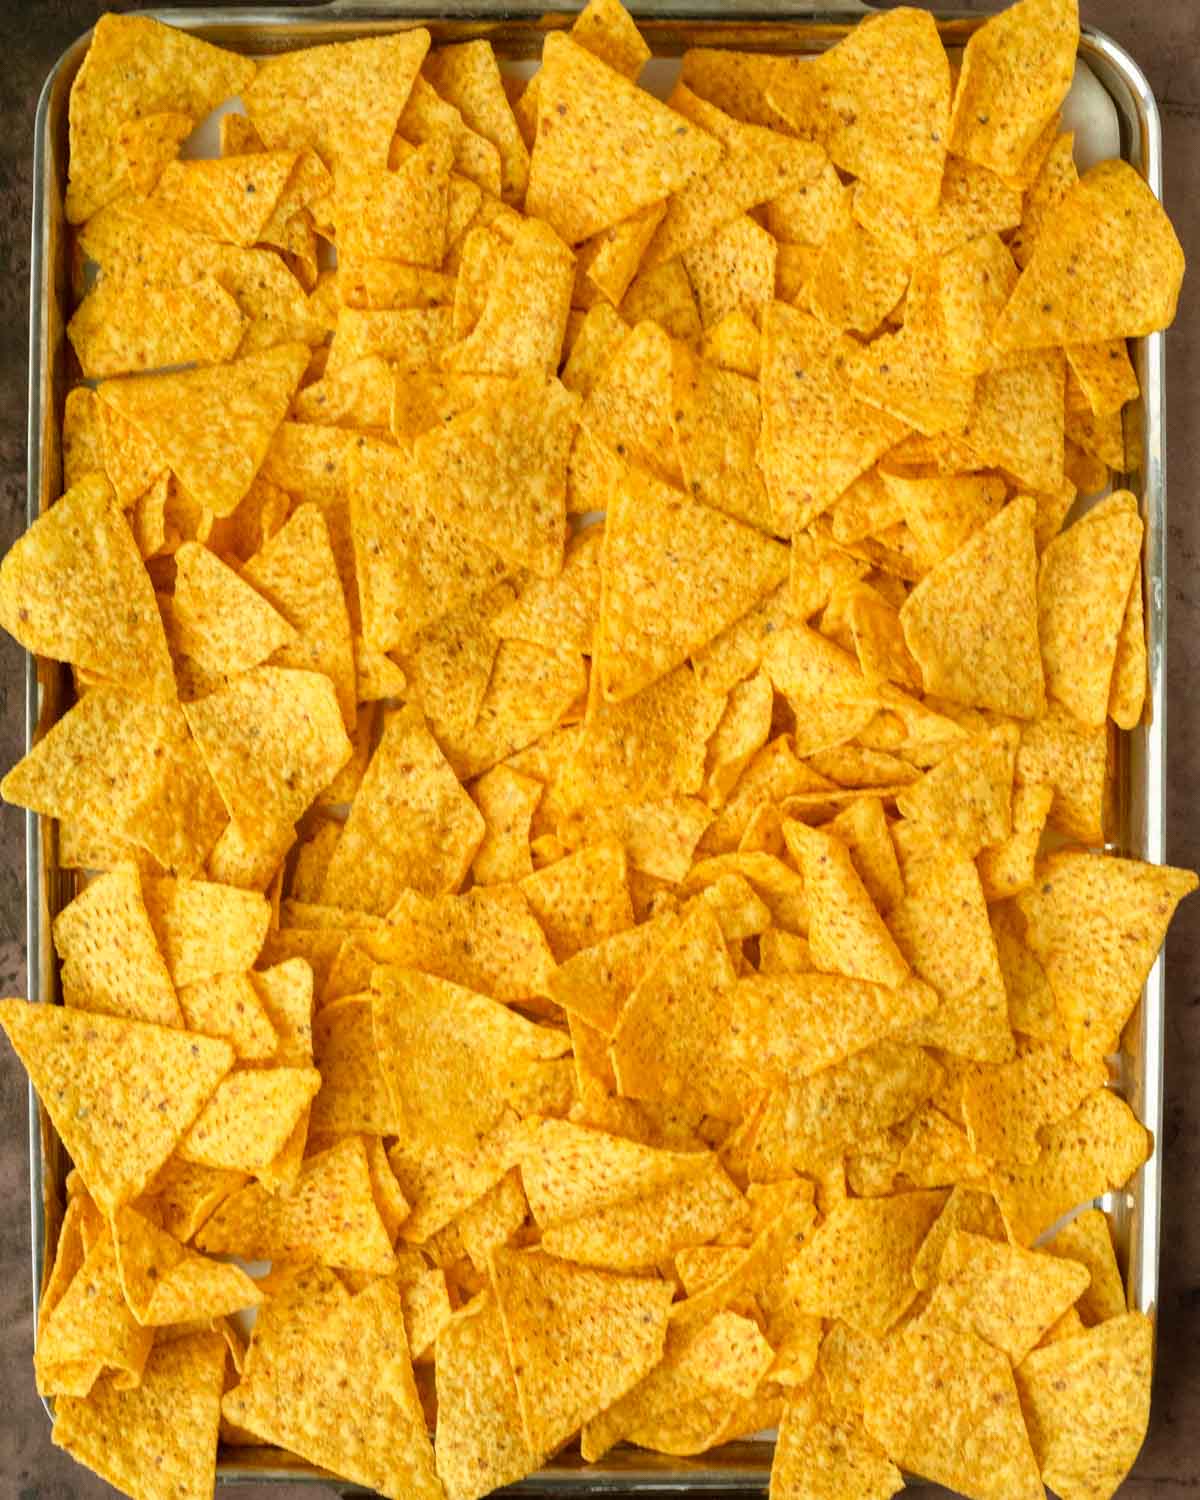 Step 1. Place the chips on the sheet pan